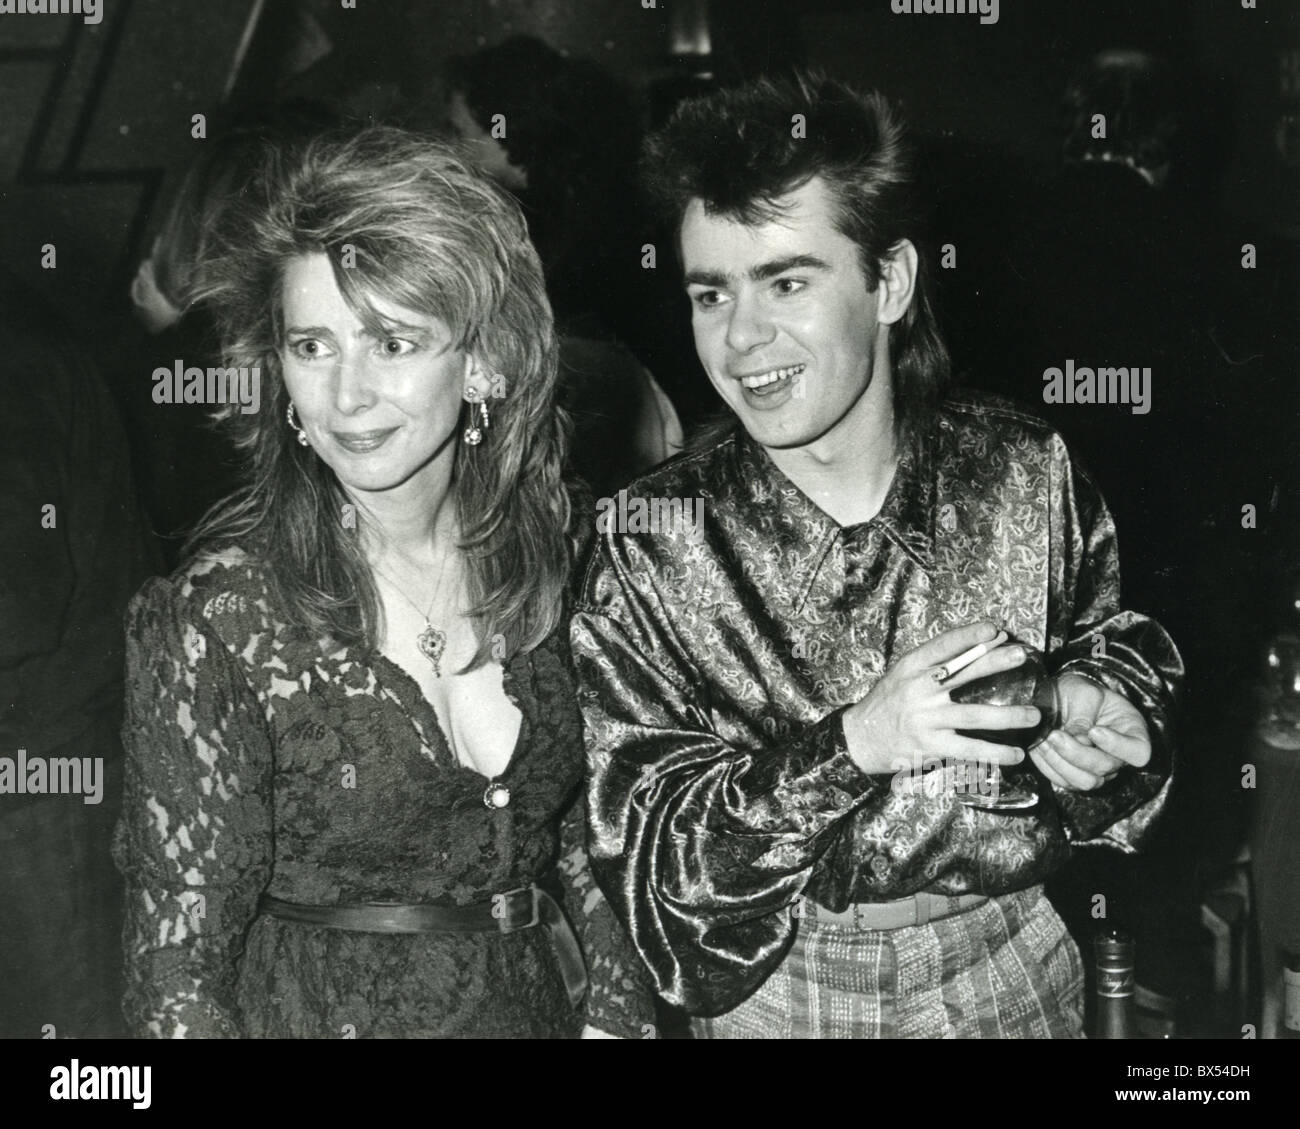 NIK KERSHAW English pop singer with his wife about Photo - Alamy